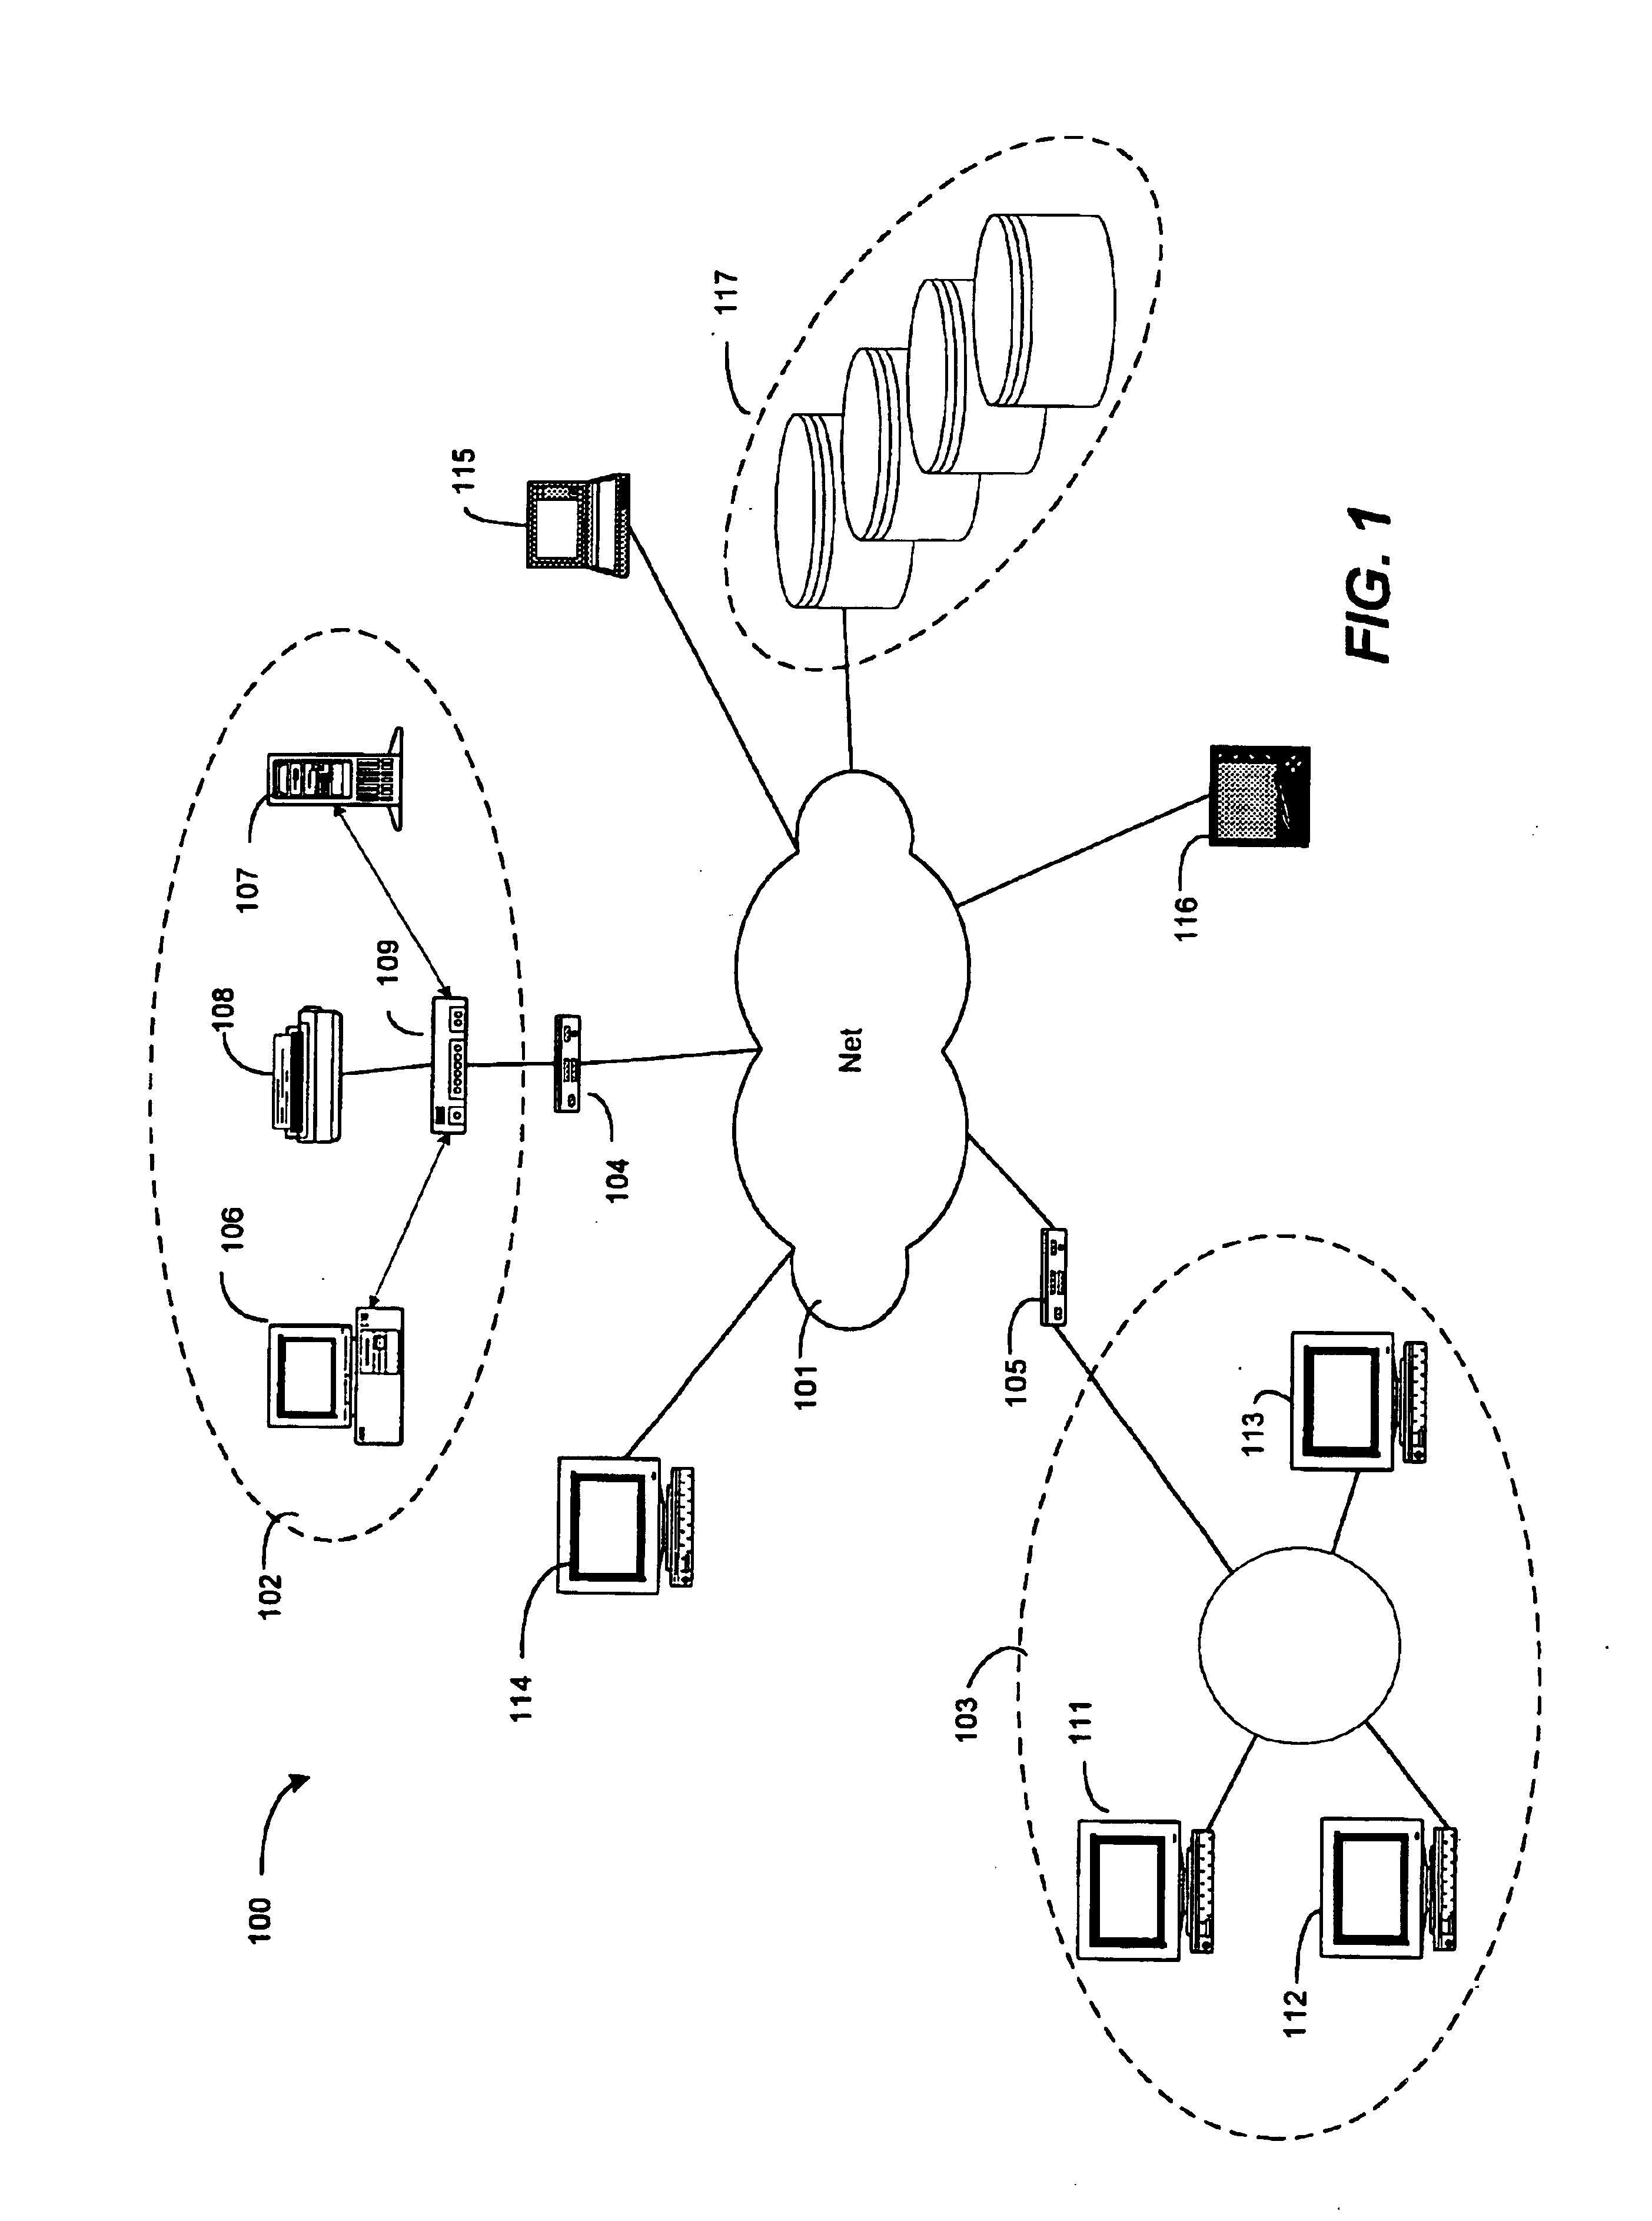 System and method for providing dynamic references between services in a computer system